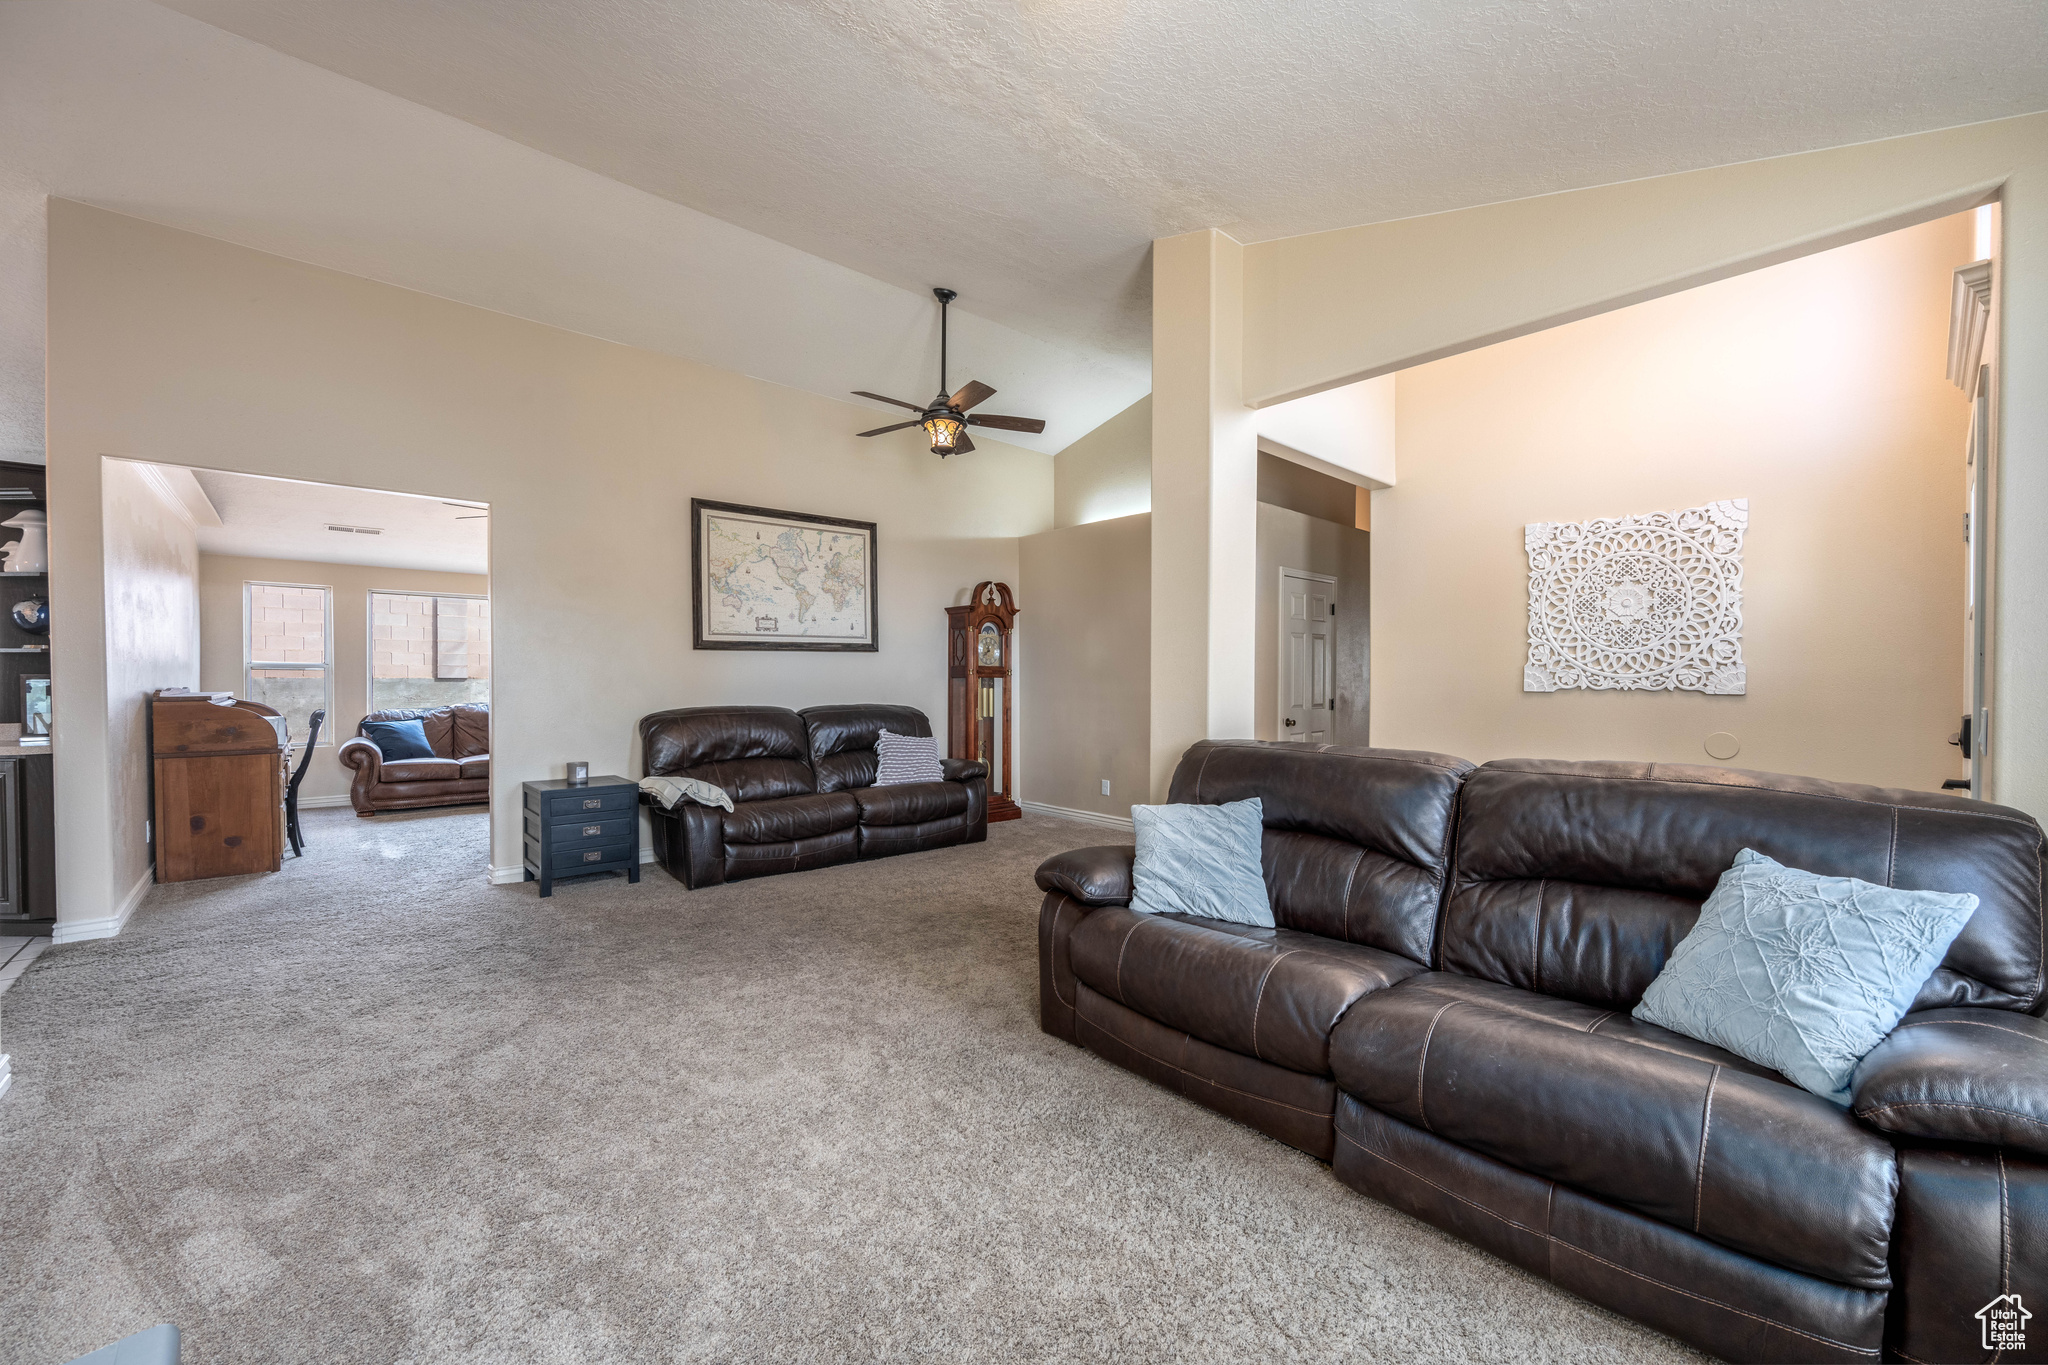 Living room featuring lofted ceiling, ceiling fan, light carpet, and a textured ceiling